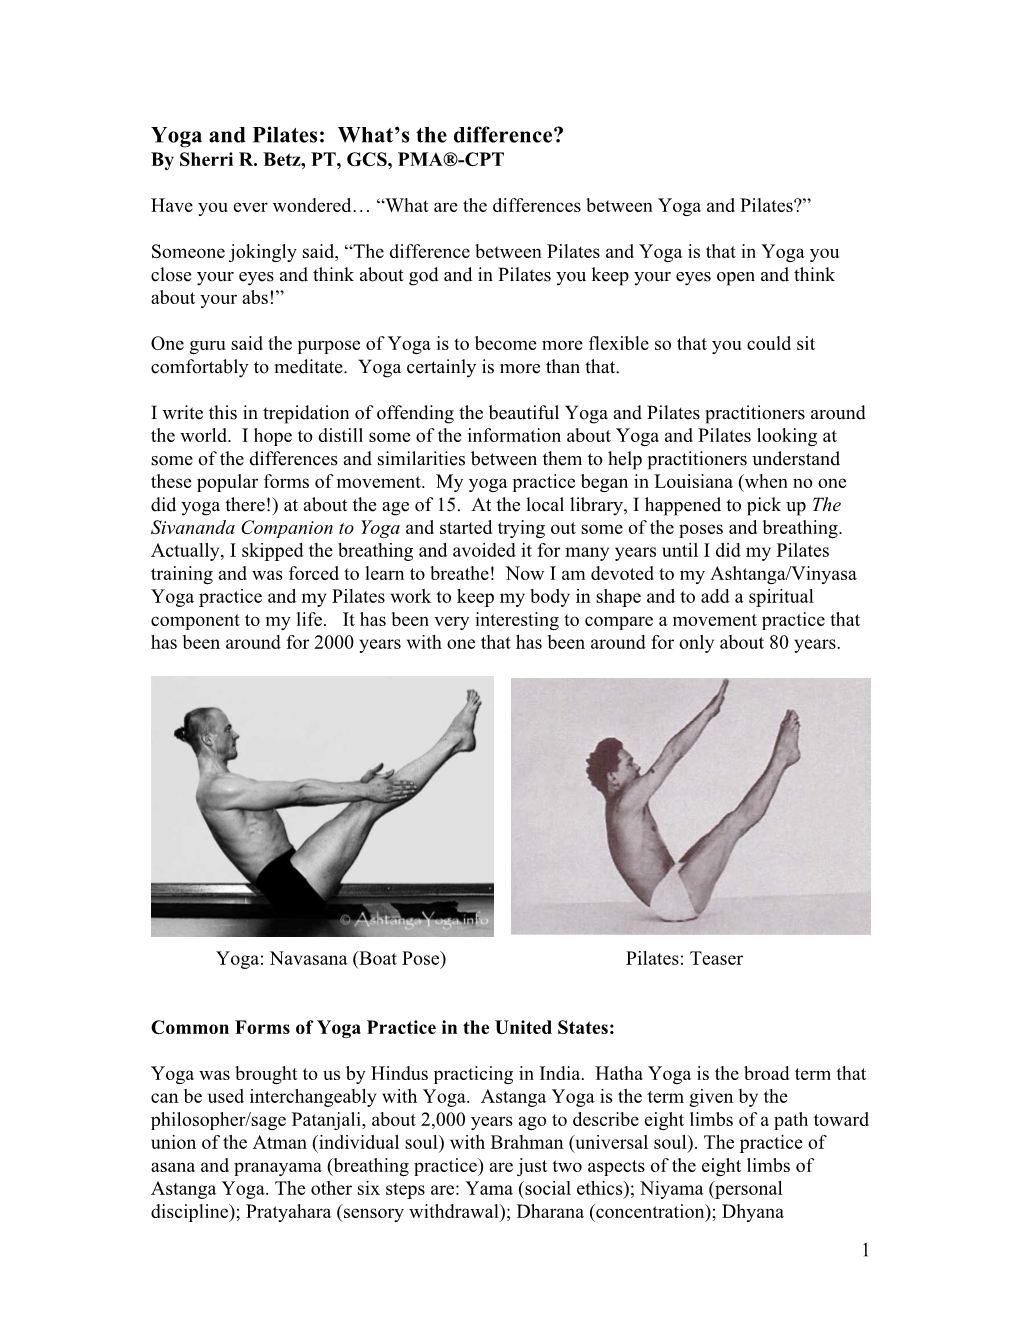 Yoga and Pilates: What’S the Difference? by Sherri R